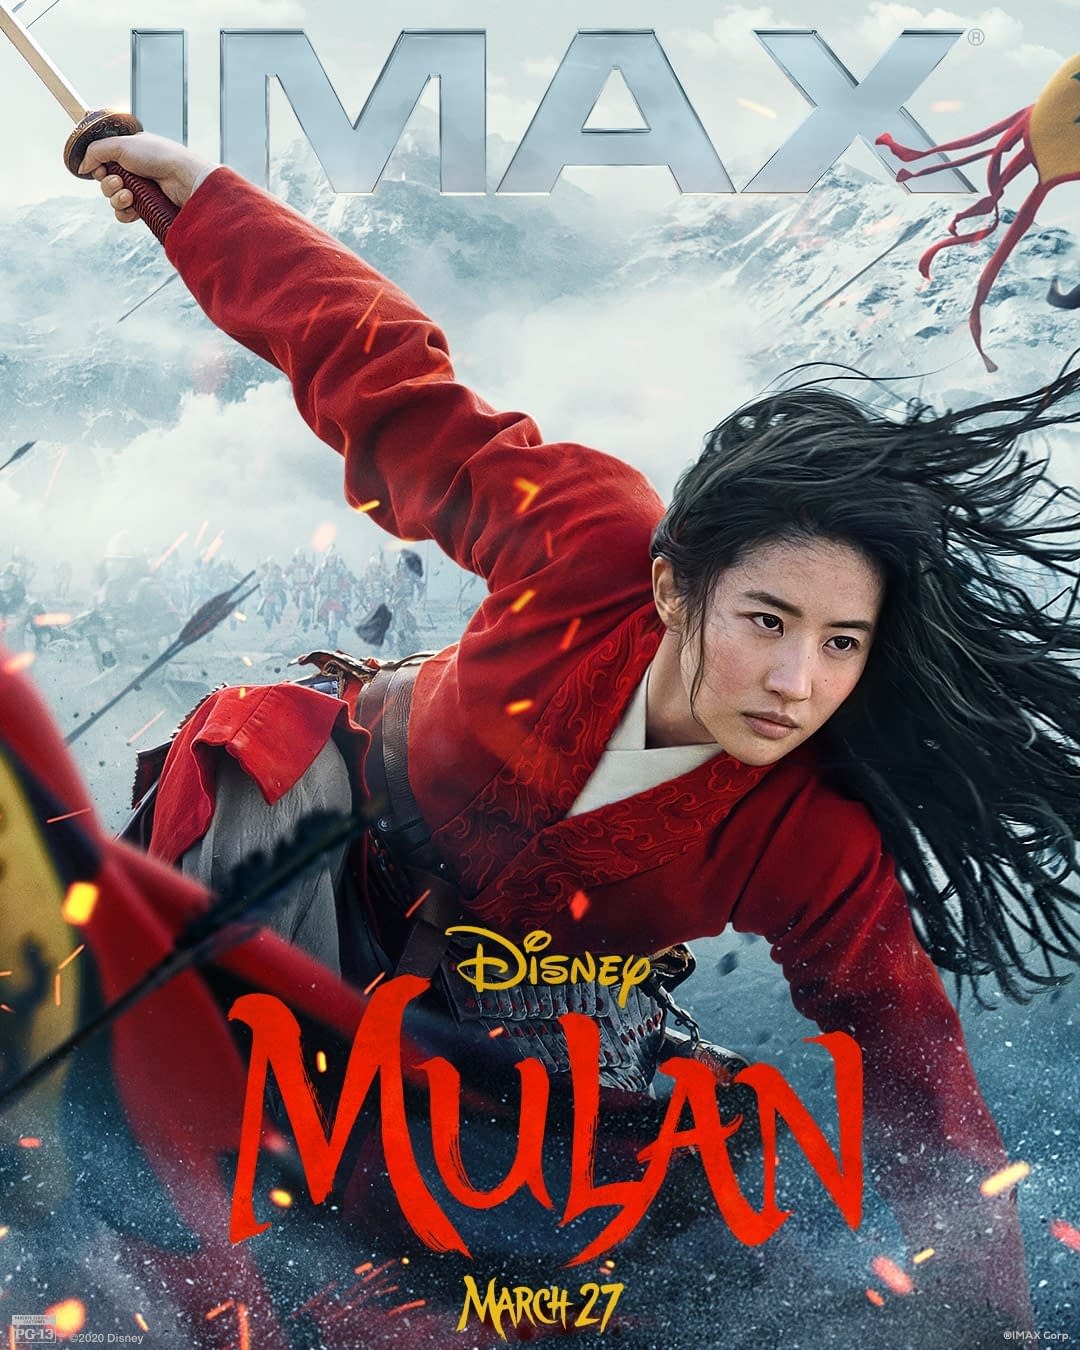 "Mulan": 3 New Posters and a New TV Spot as Tickets Go On Sale